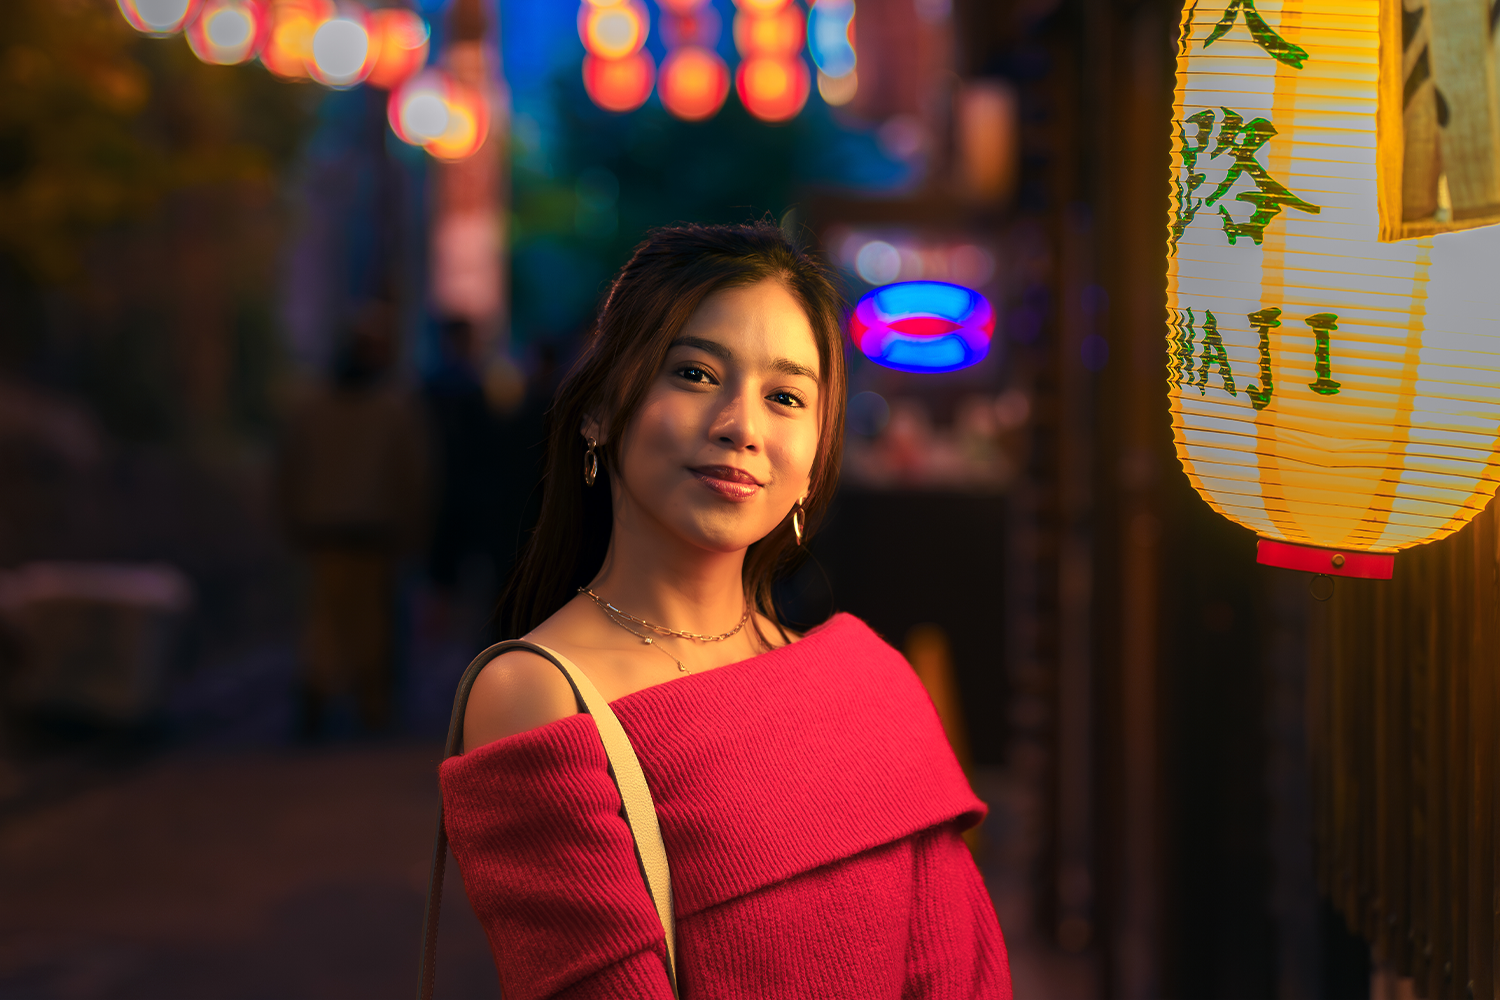 Night portrait of a girl In Nonbei Yokocho, a hidden alley with tiny bars next to Shibuya Station.